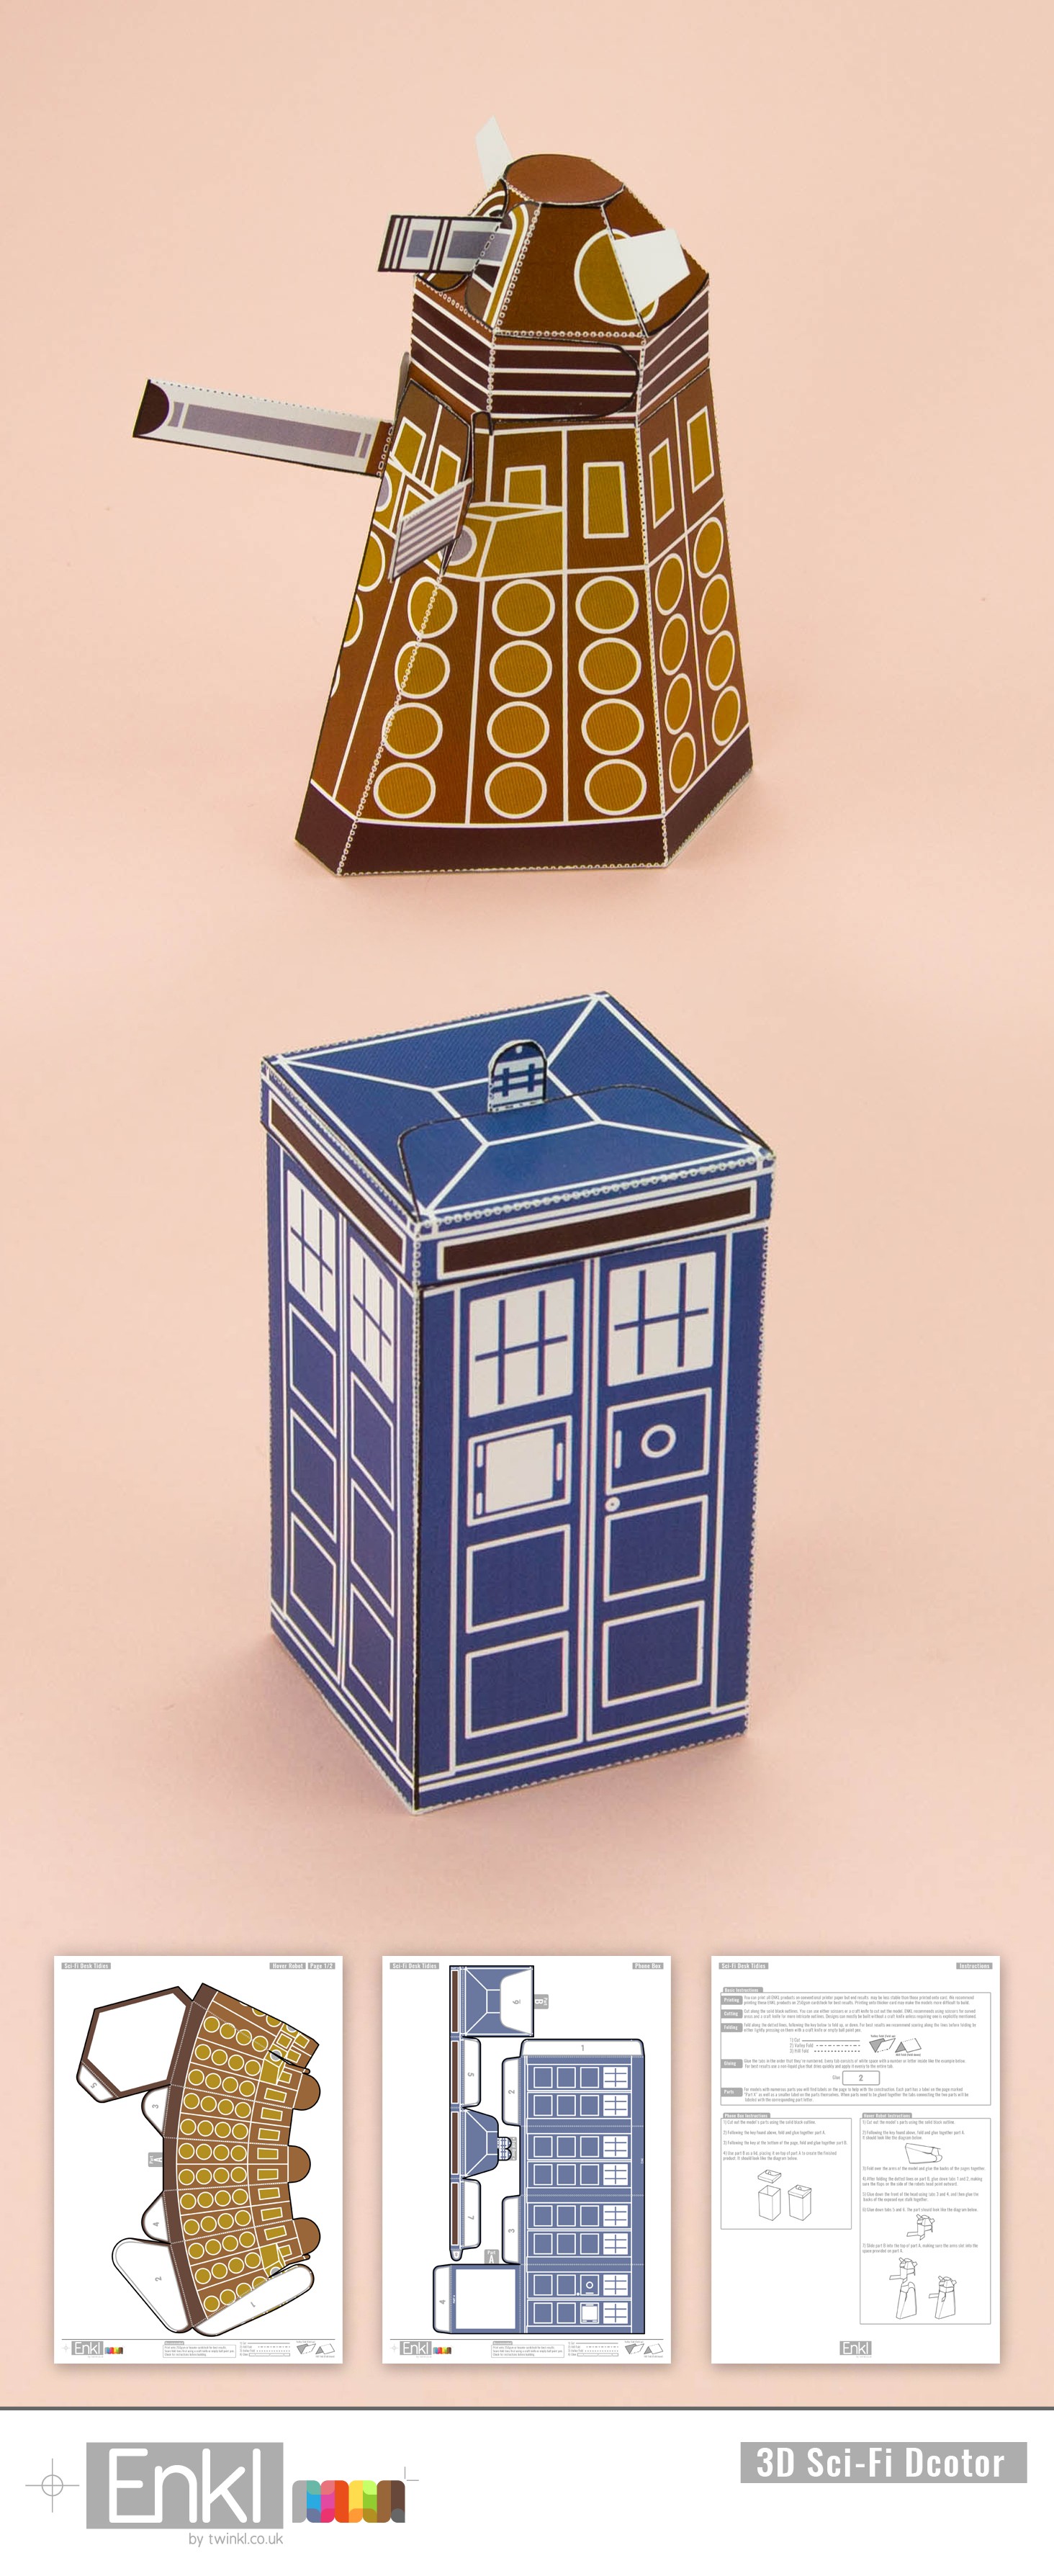 Dr who Papercraft Sci Fi Doctor Desk Ti S Printable Enkl by Twinkl